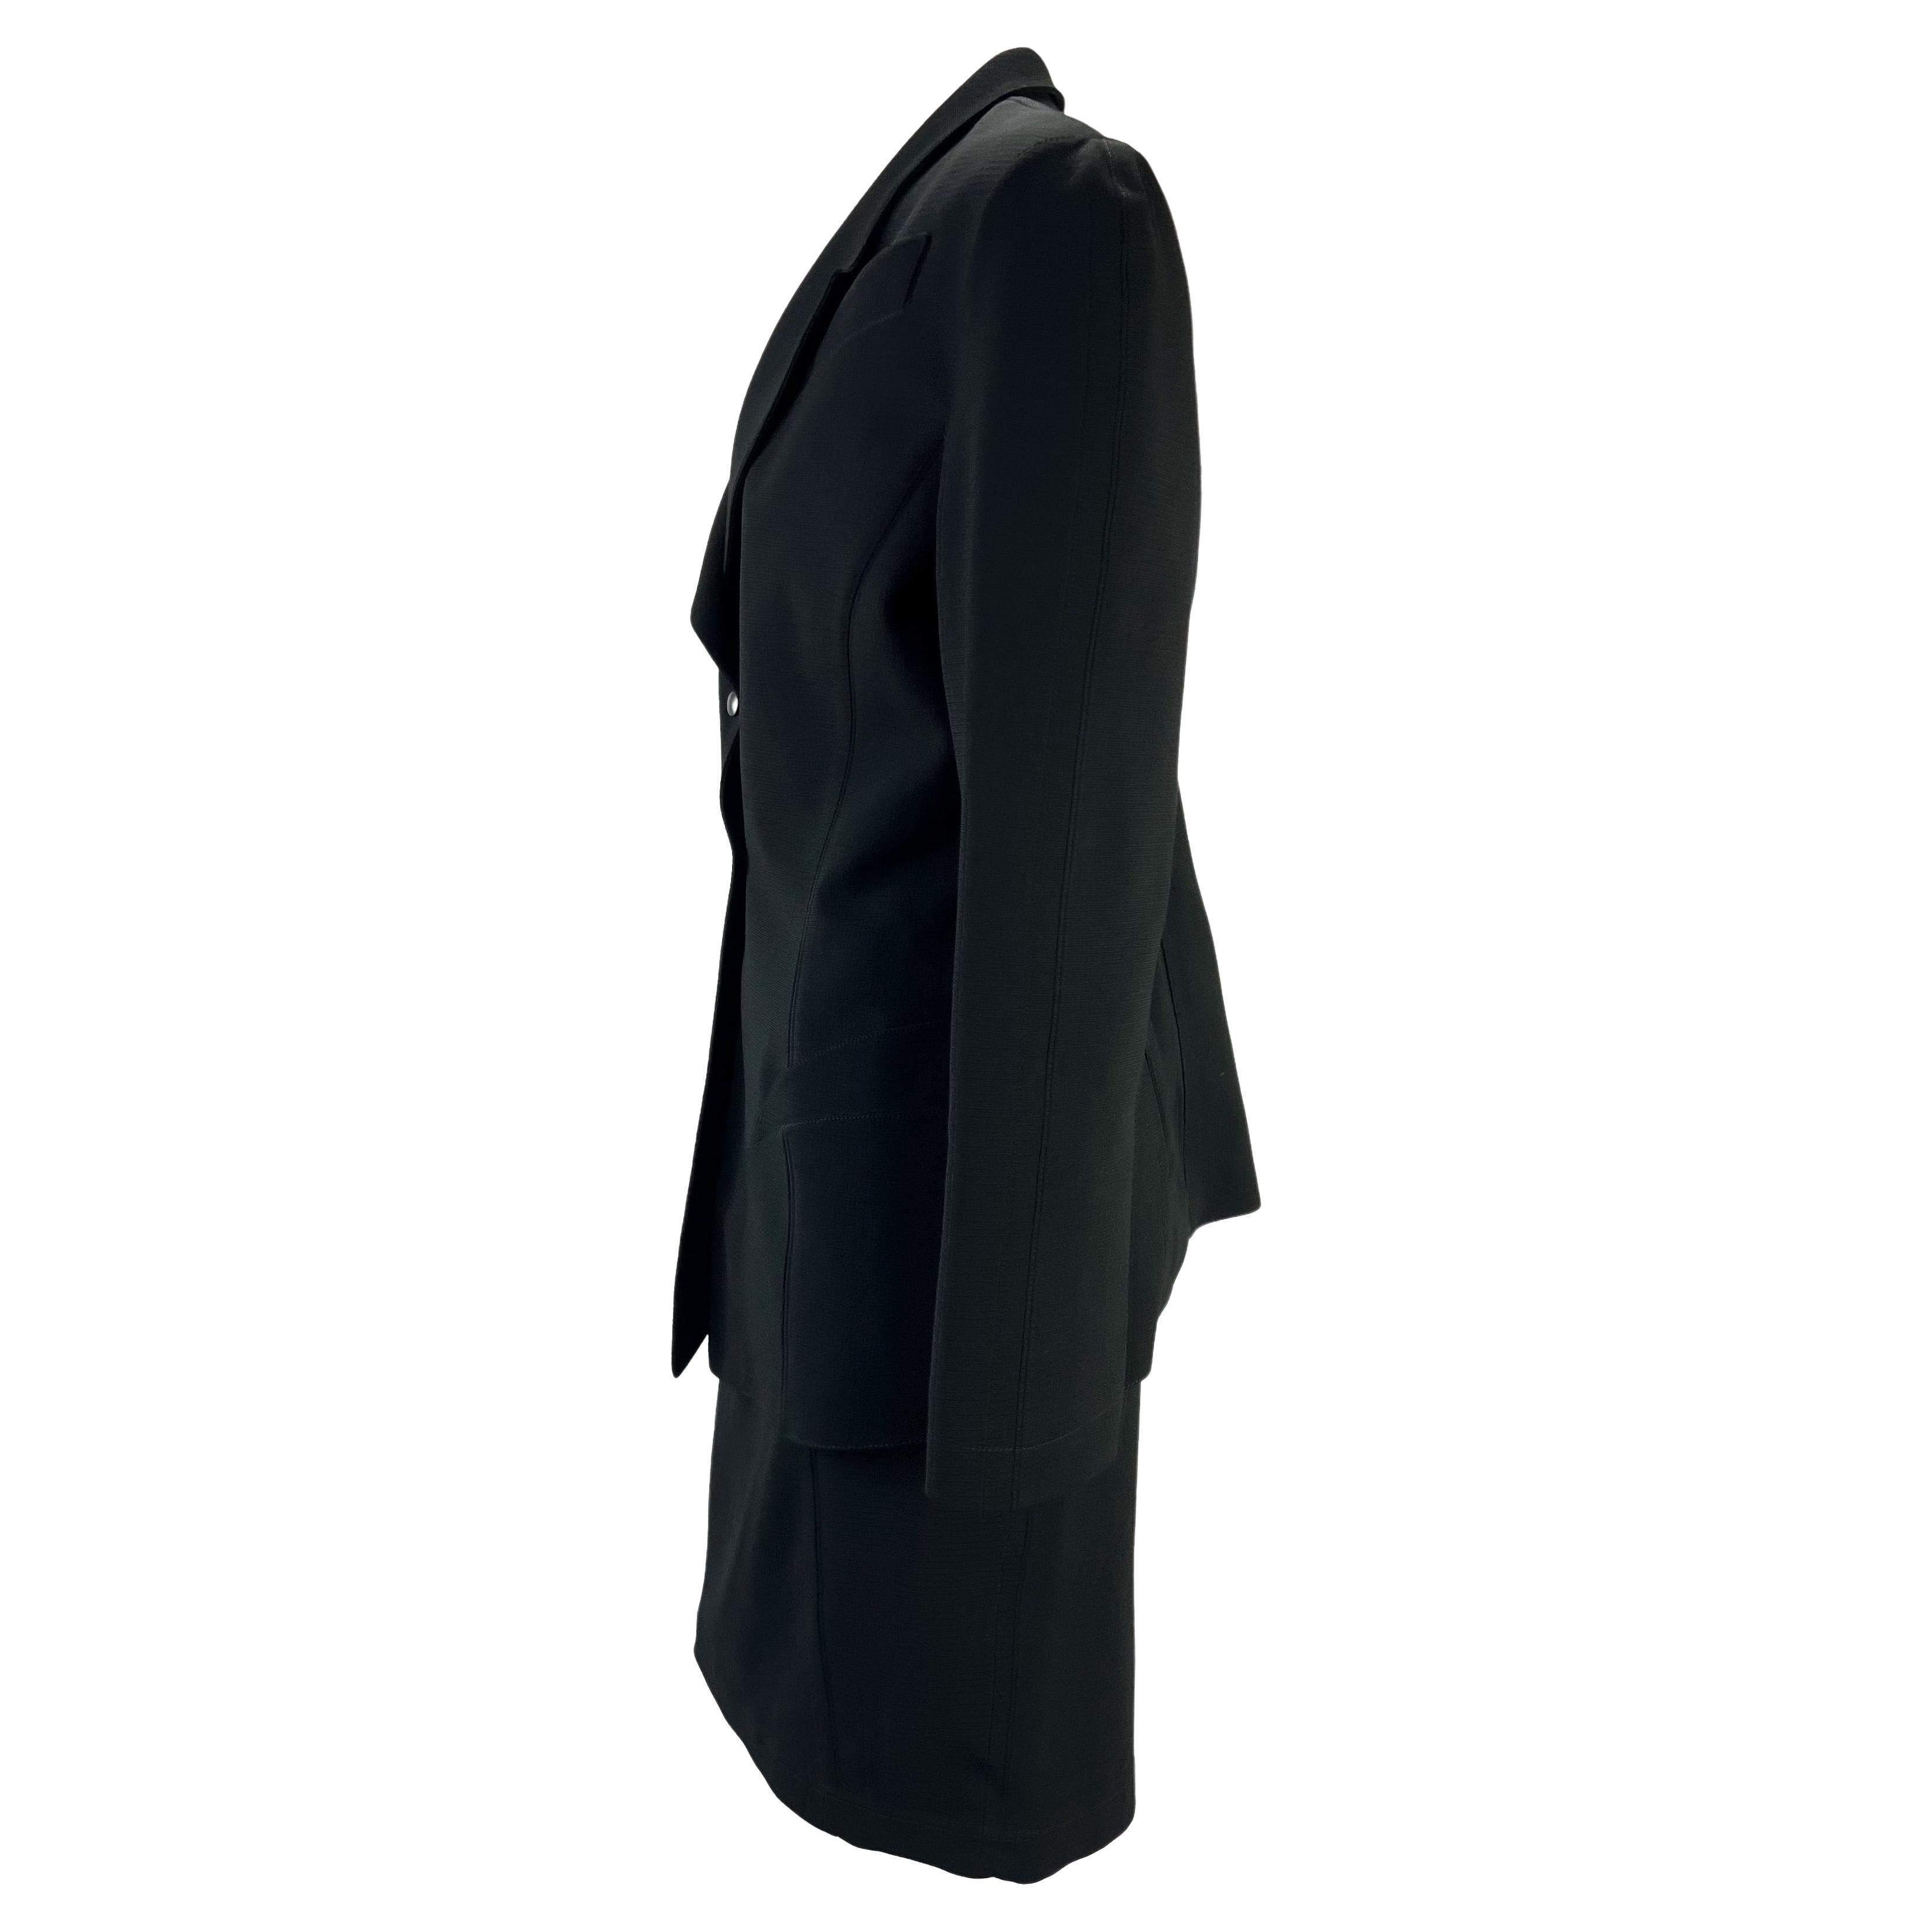 1980s Thierry Mugler Sculptural Black Wool Skirt Suit In Excellent Condition For Sale In West Hollywood, CA